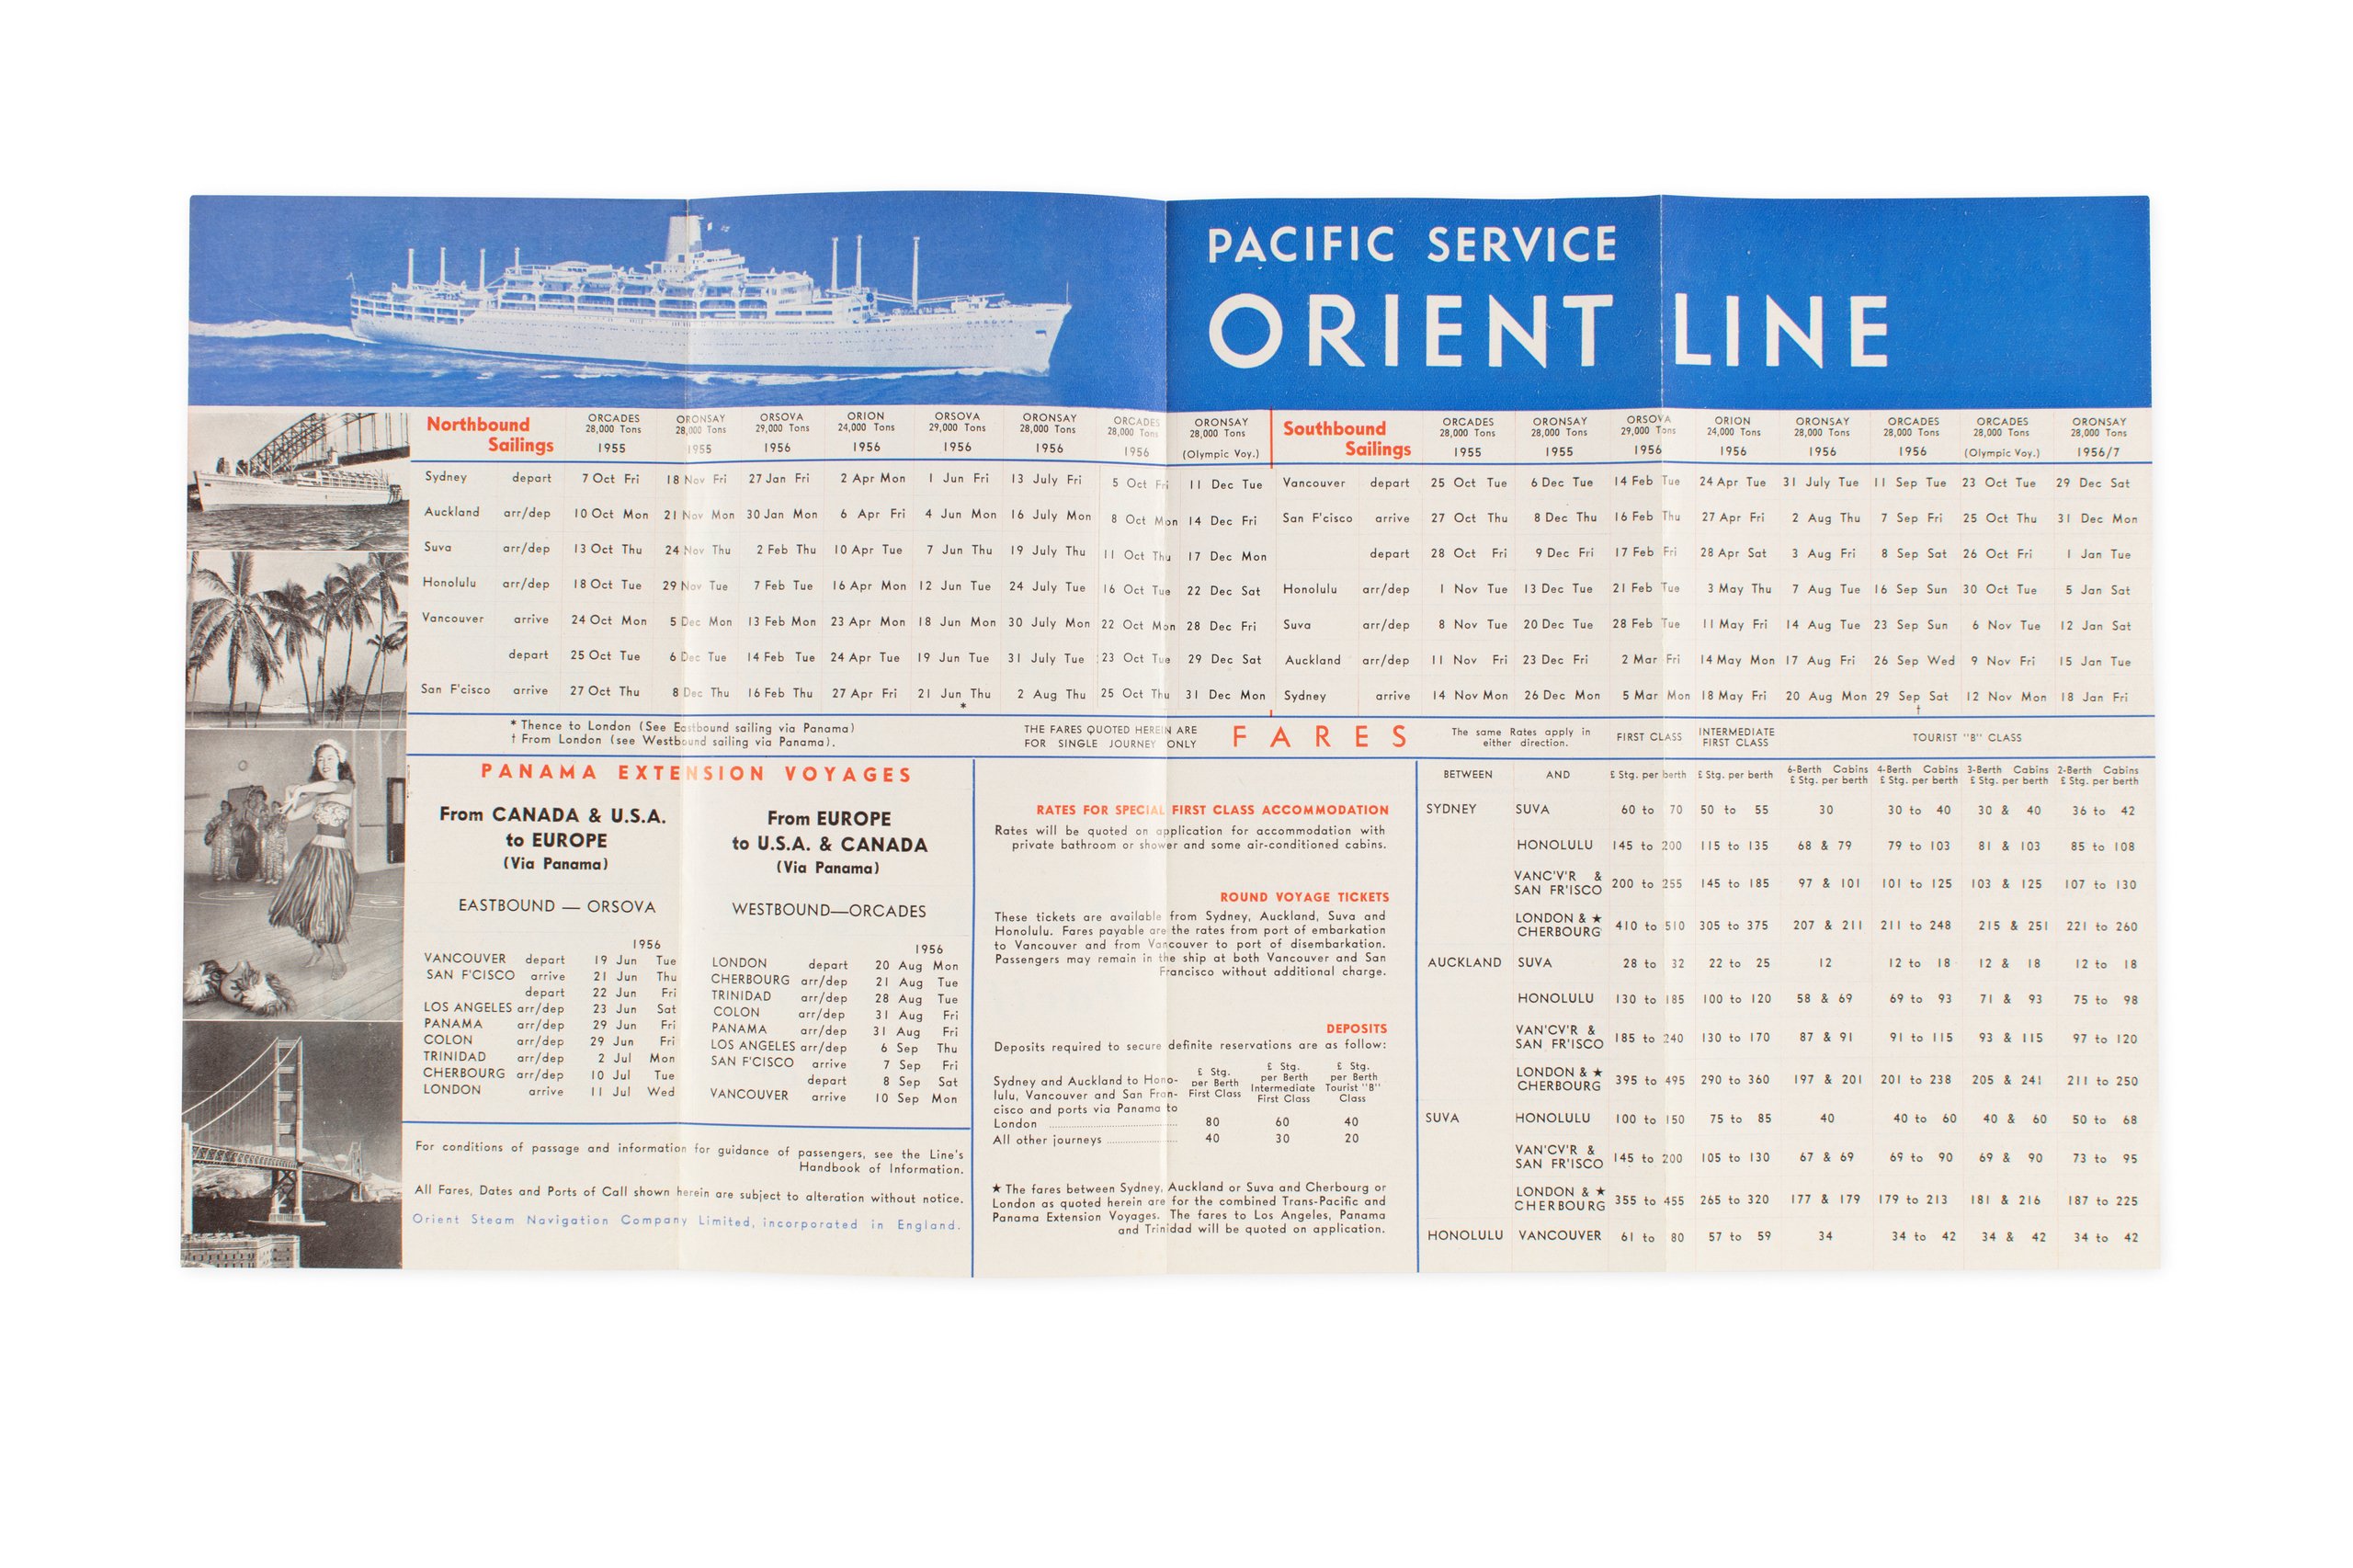 Orient Line pamphlet designed by Dahl and Geoffrey Collings